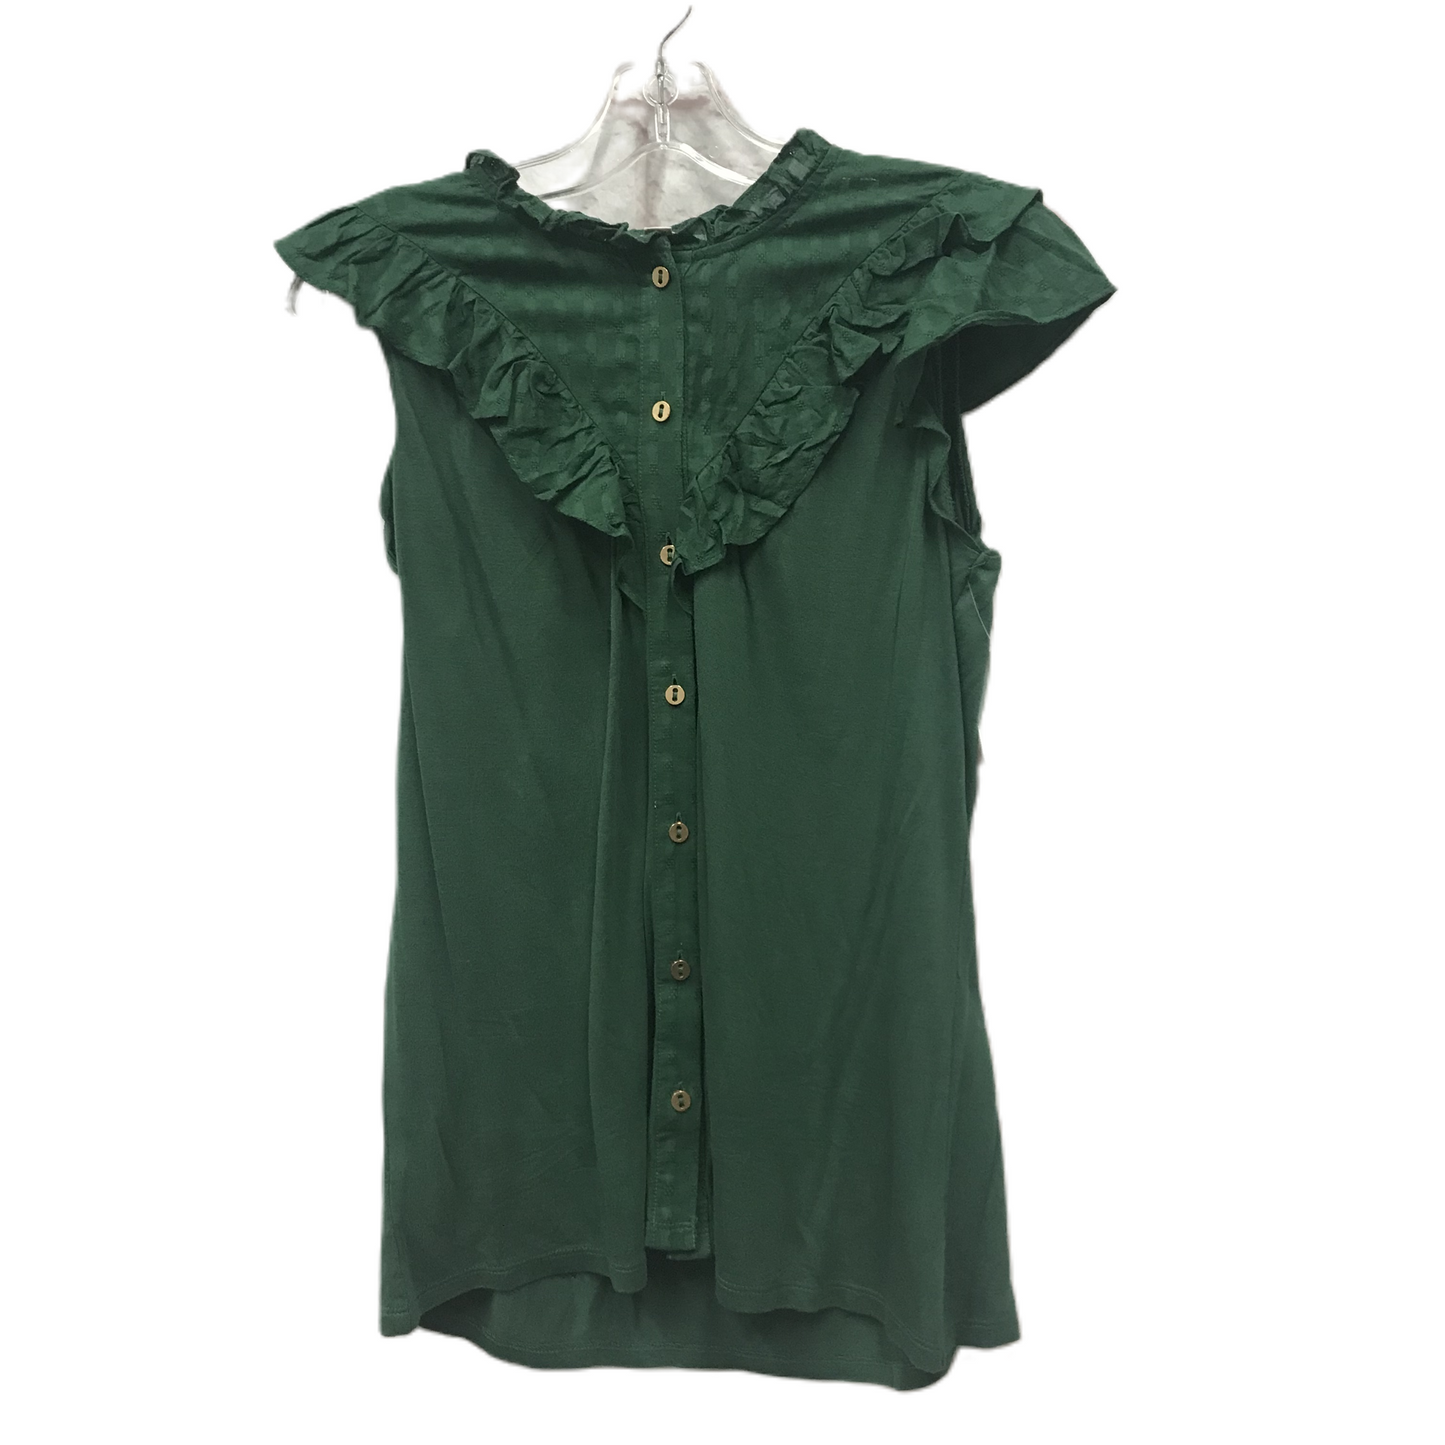 Green Top Short Sleeve By Loft, Size: S